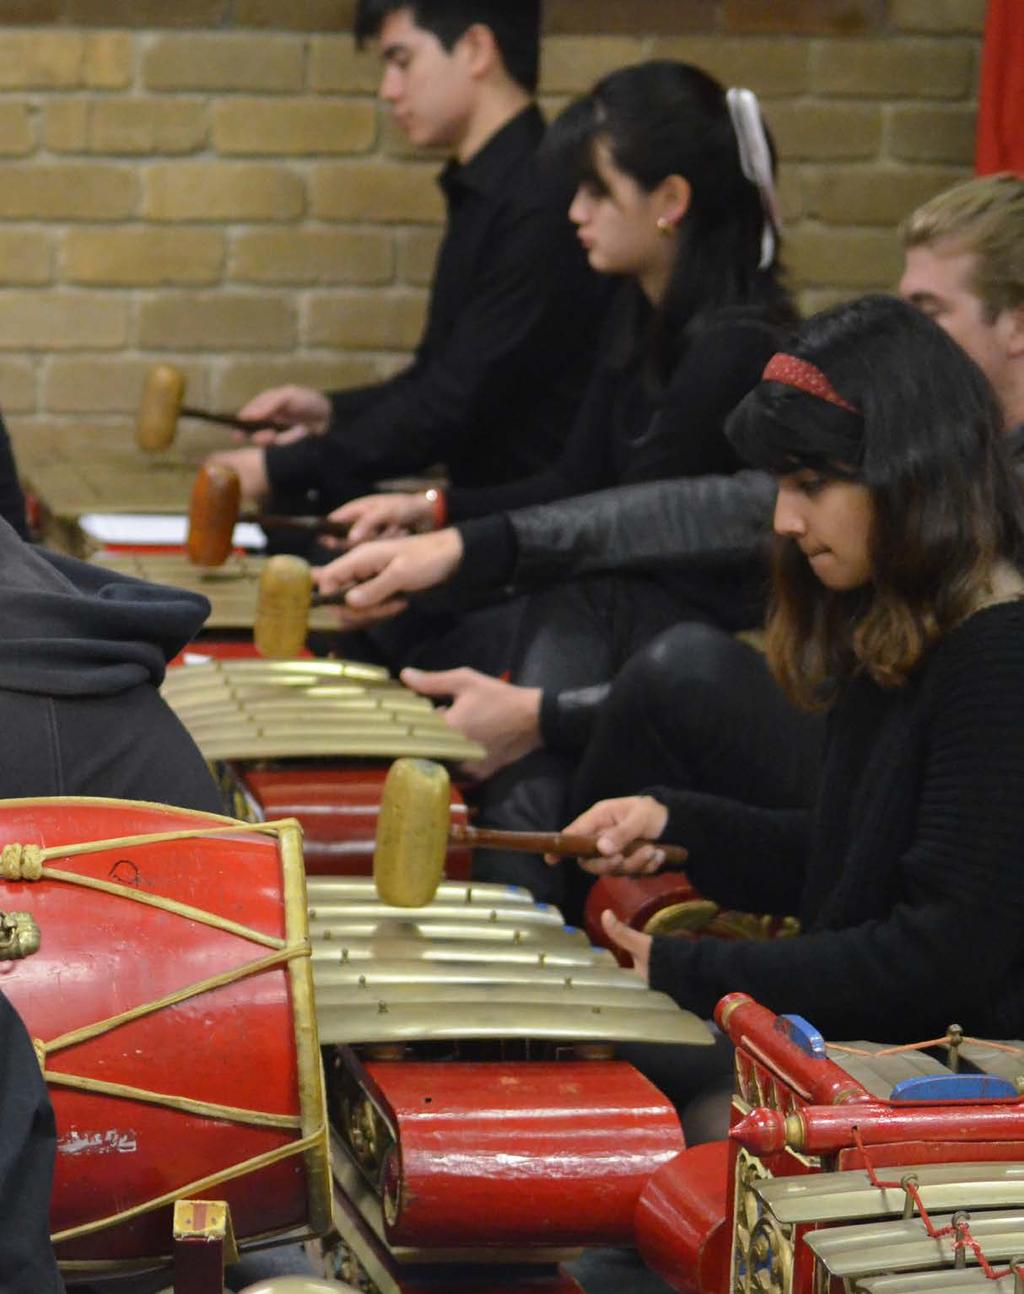 TEACHING Gamelan classes remained popular in 2015, with 39 students enrolled in first semester and 39 students enrolled in second semester.